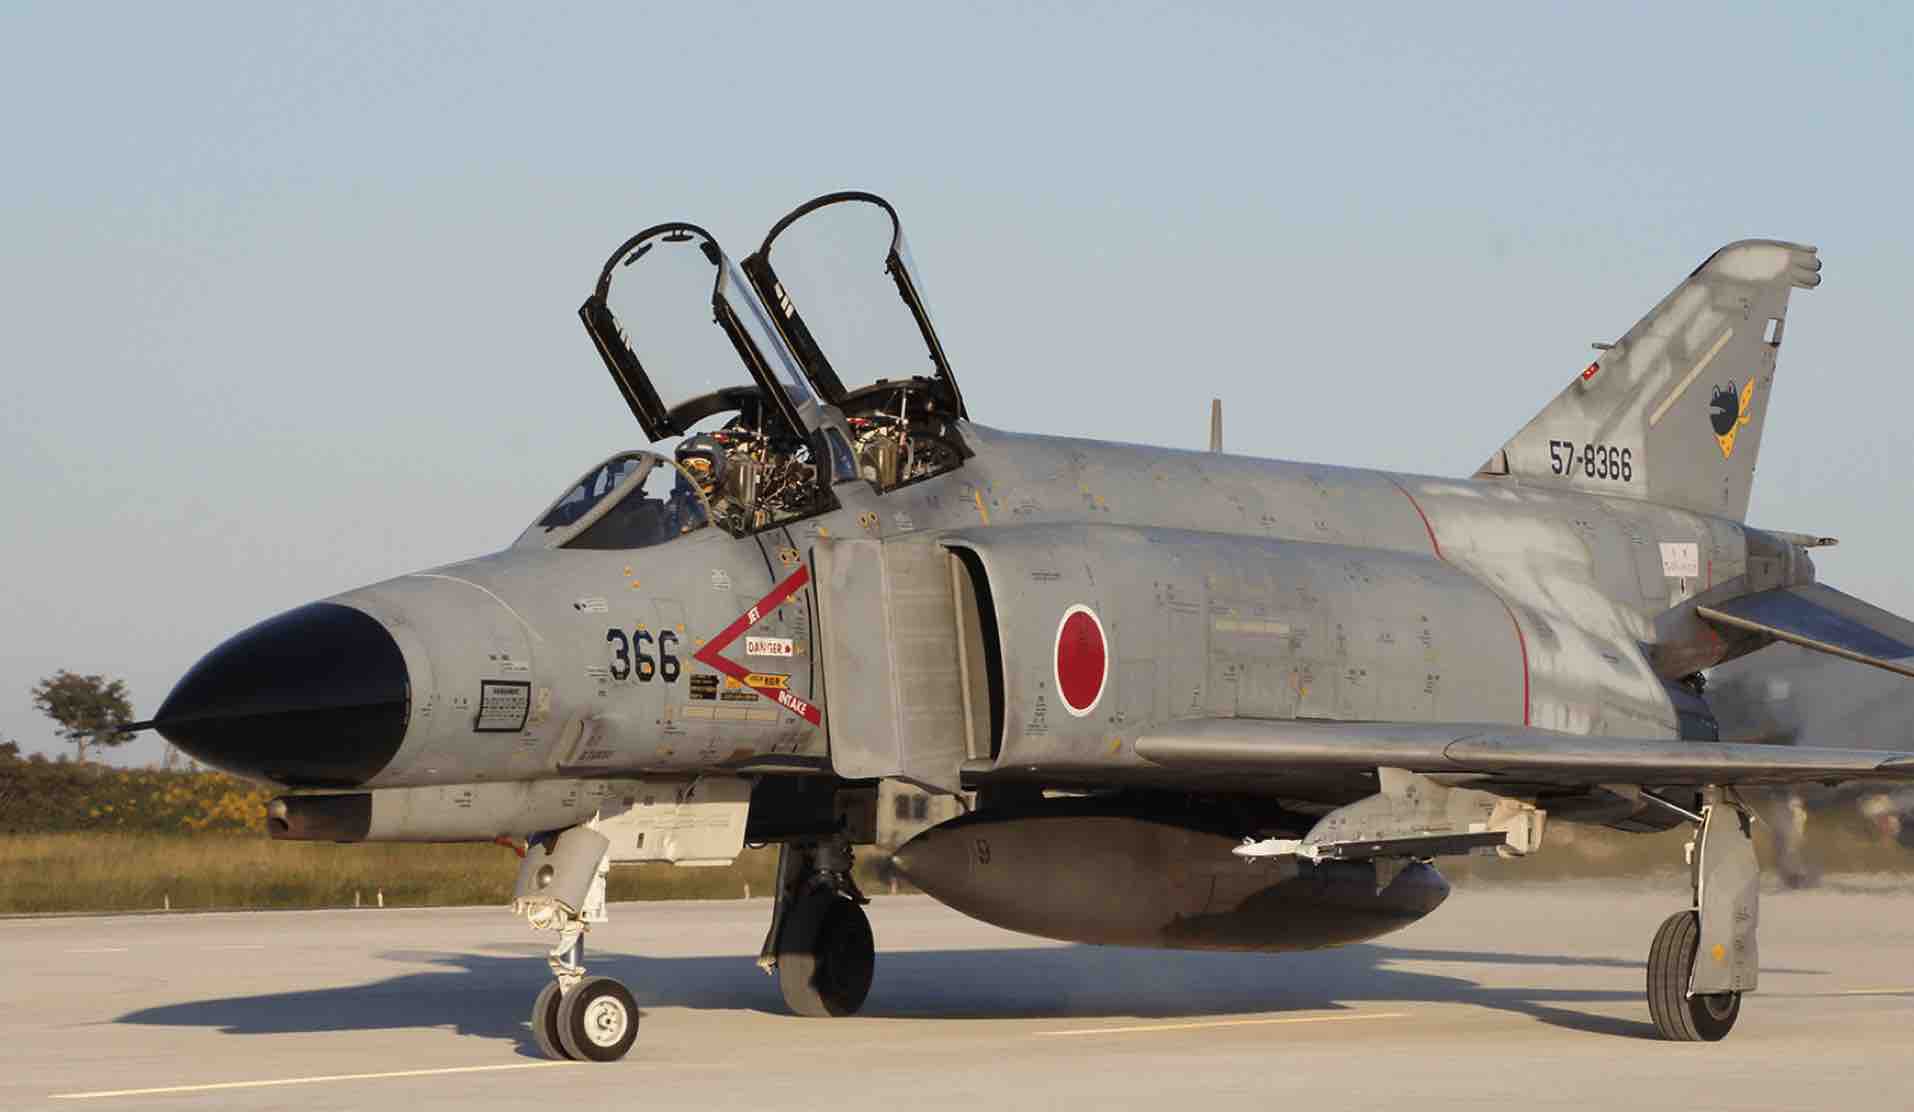 Japanese F-4 fighter